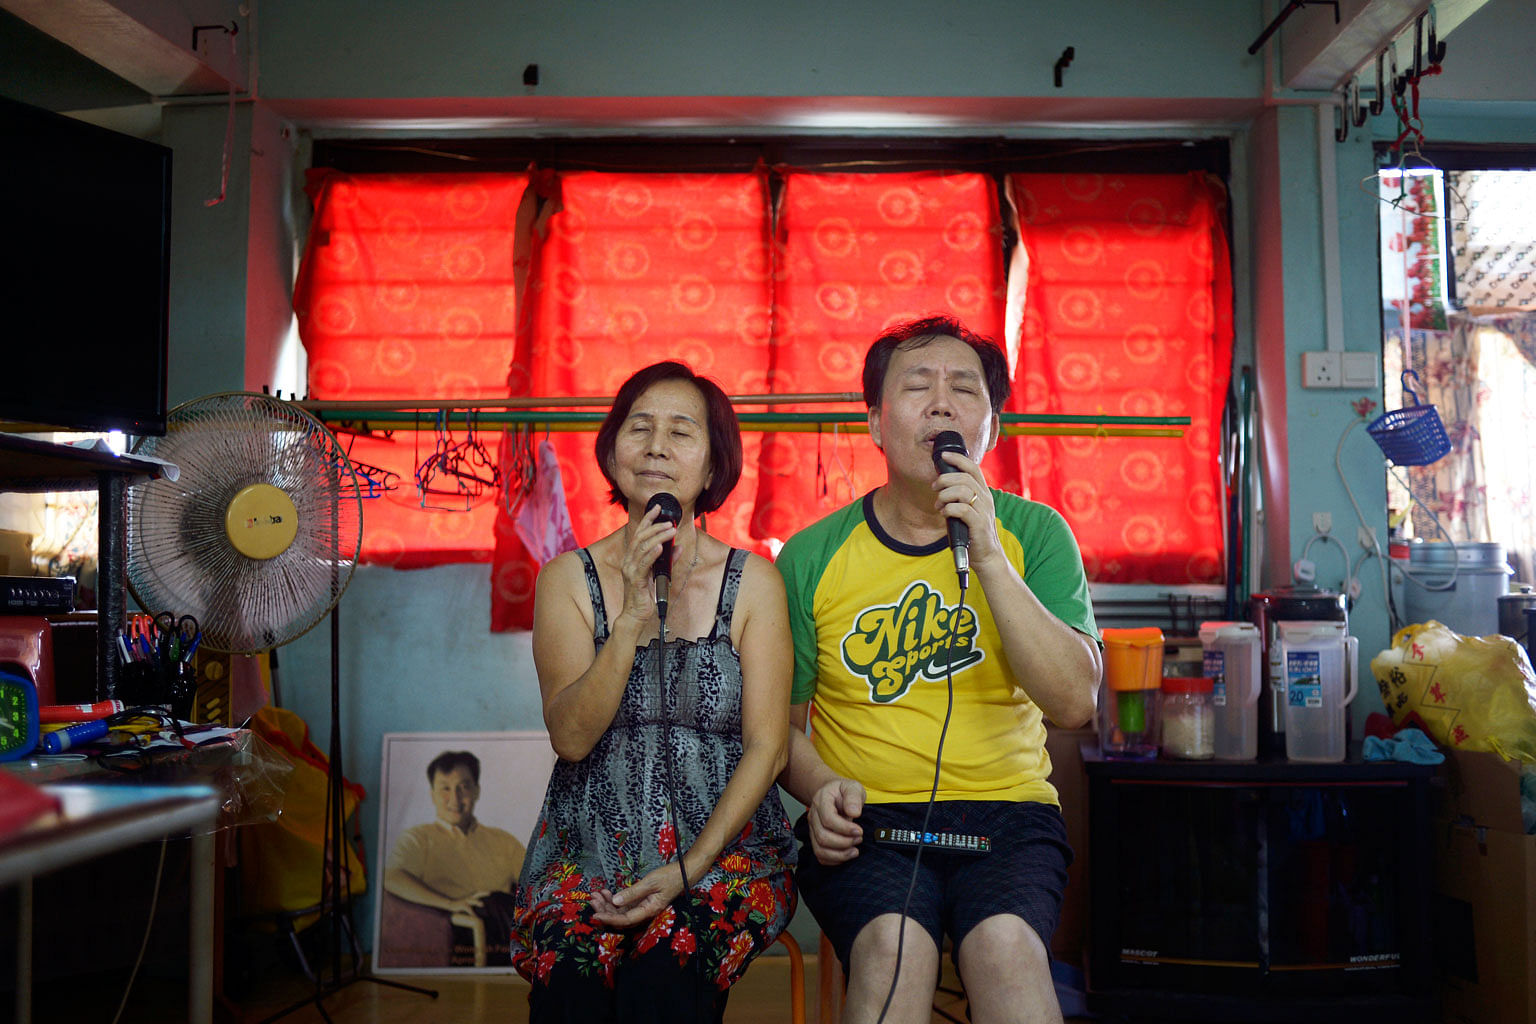 Madam Tian Ying Lee, 62, and her husband Wong Ah Fook, 53. The couple have lived in Dakota Crescent (below) for 21 years and share a love for singing. They have won several singing contests, and often invite their neighbours to join them for karaoke 